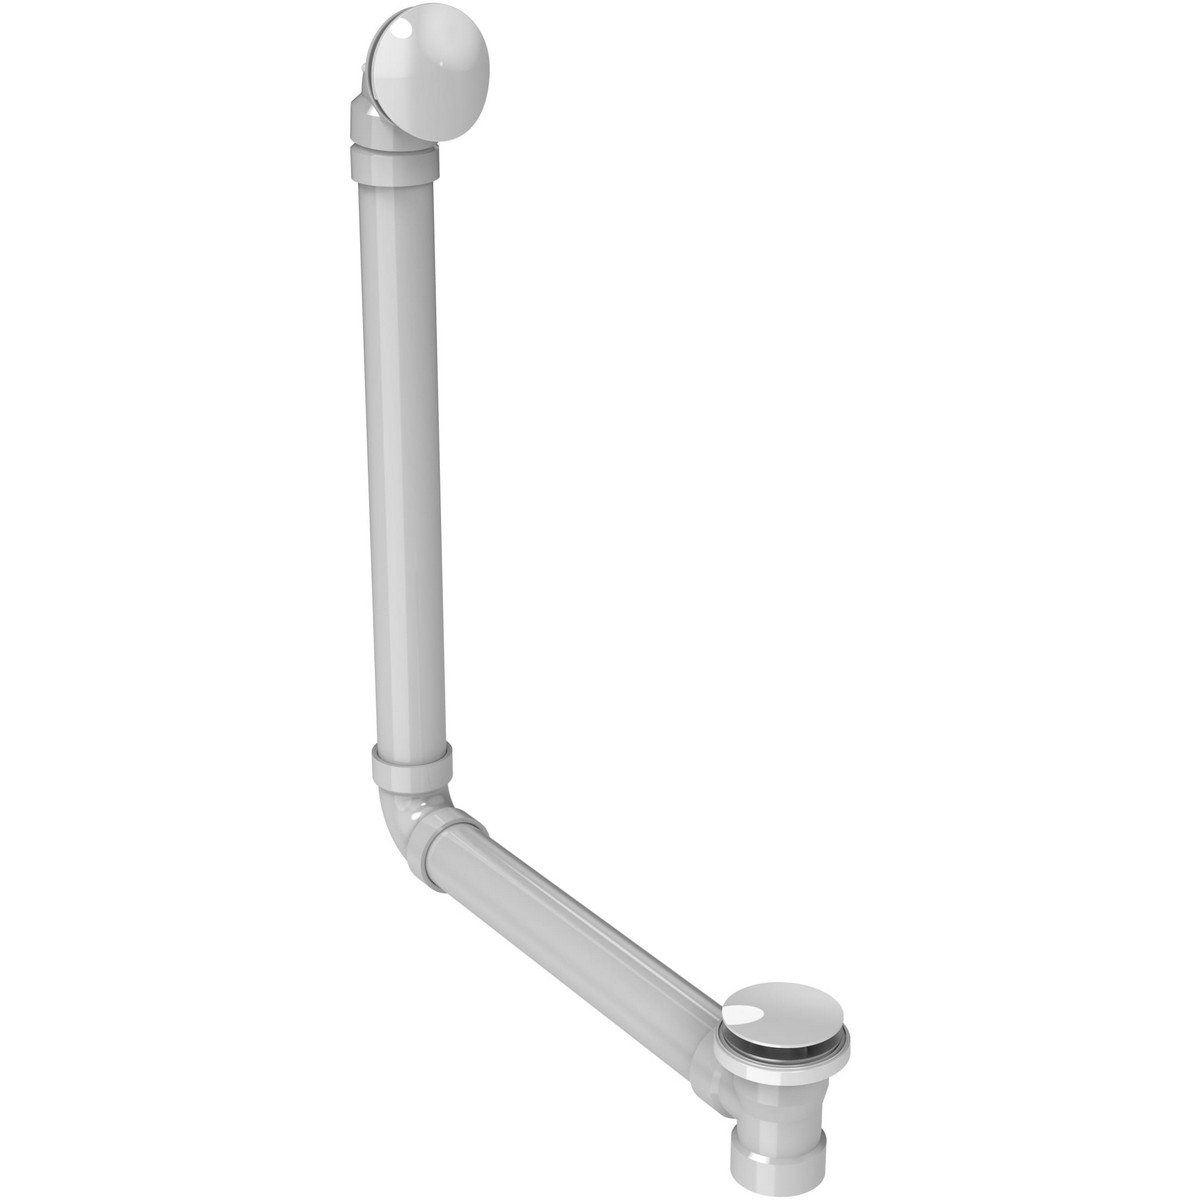 JACUZZI PG358 26 INCH TUB DRAIN KIT WITH OVERFLOW